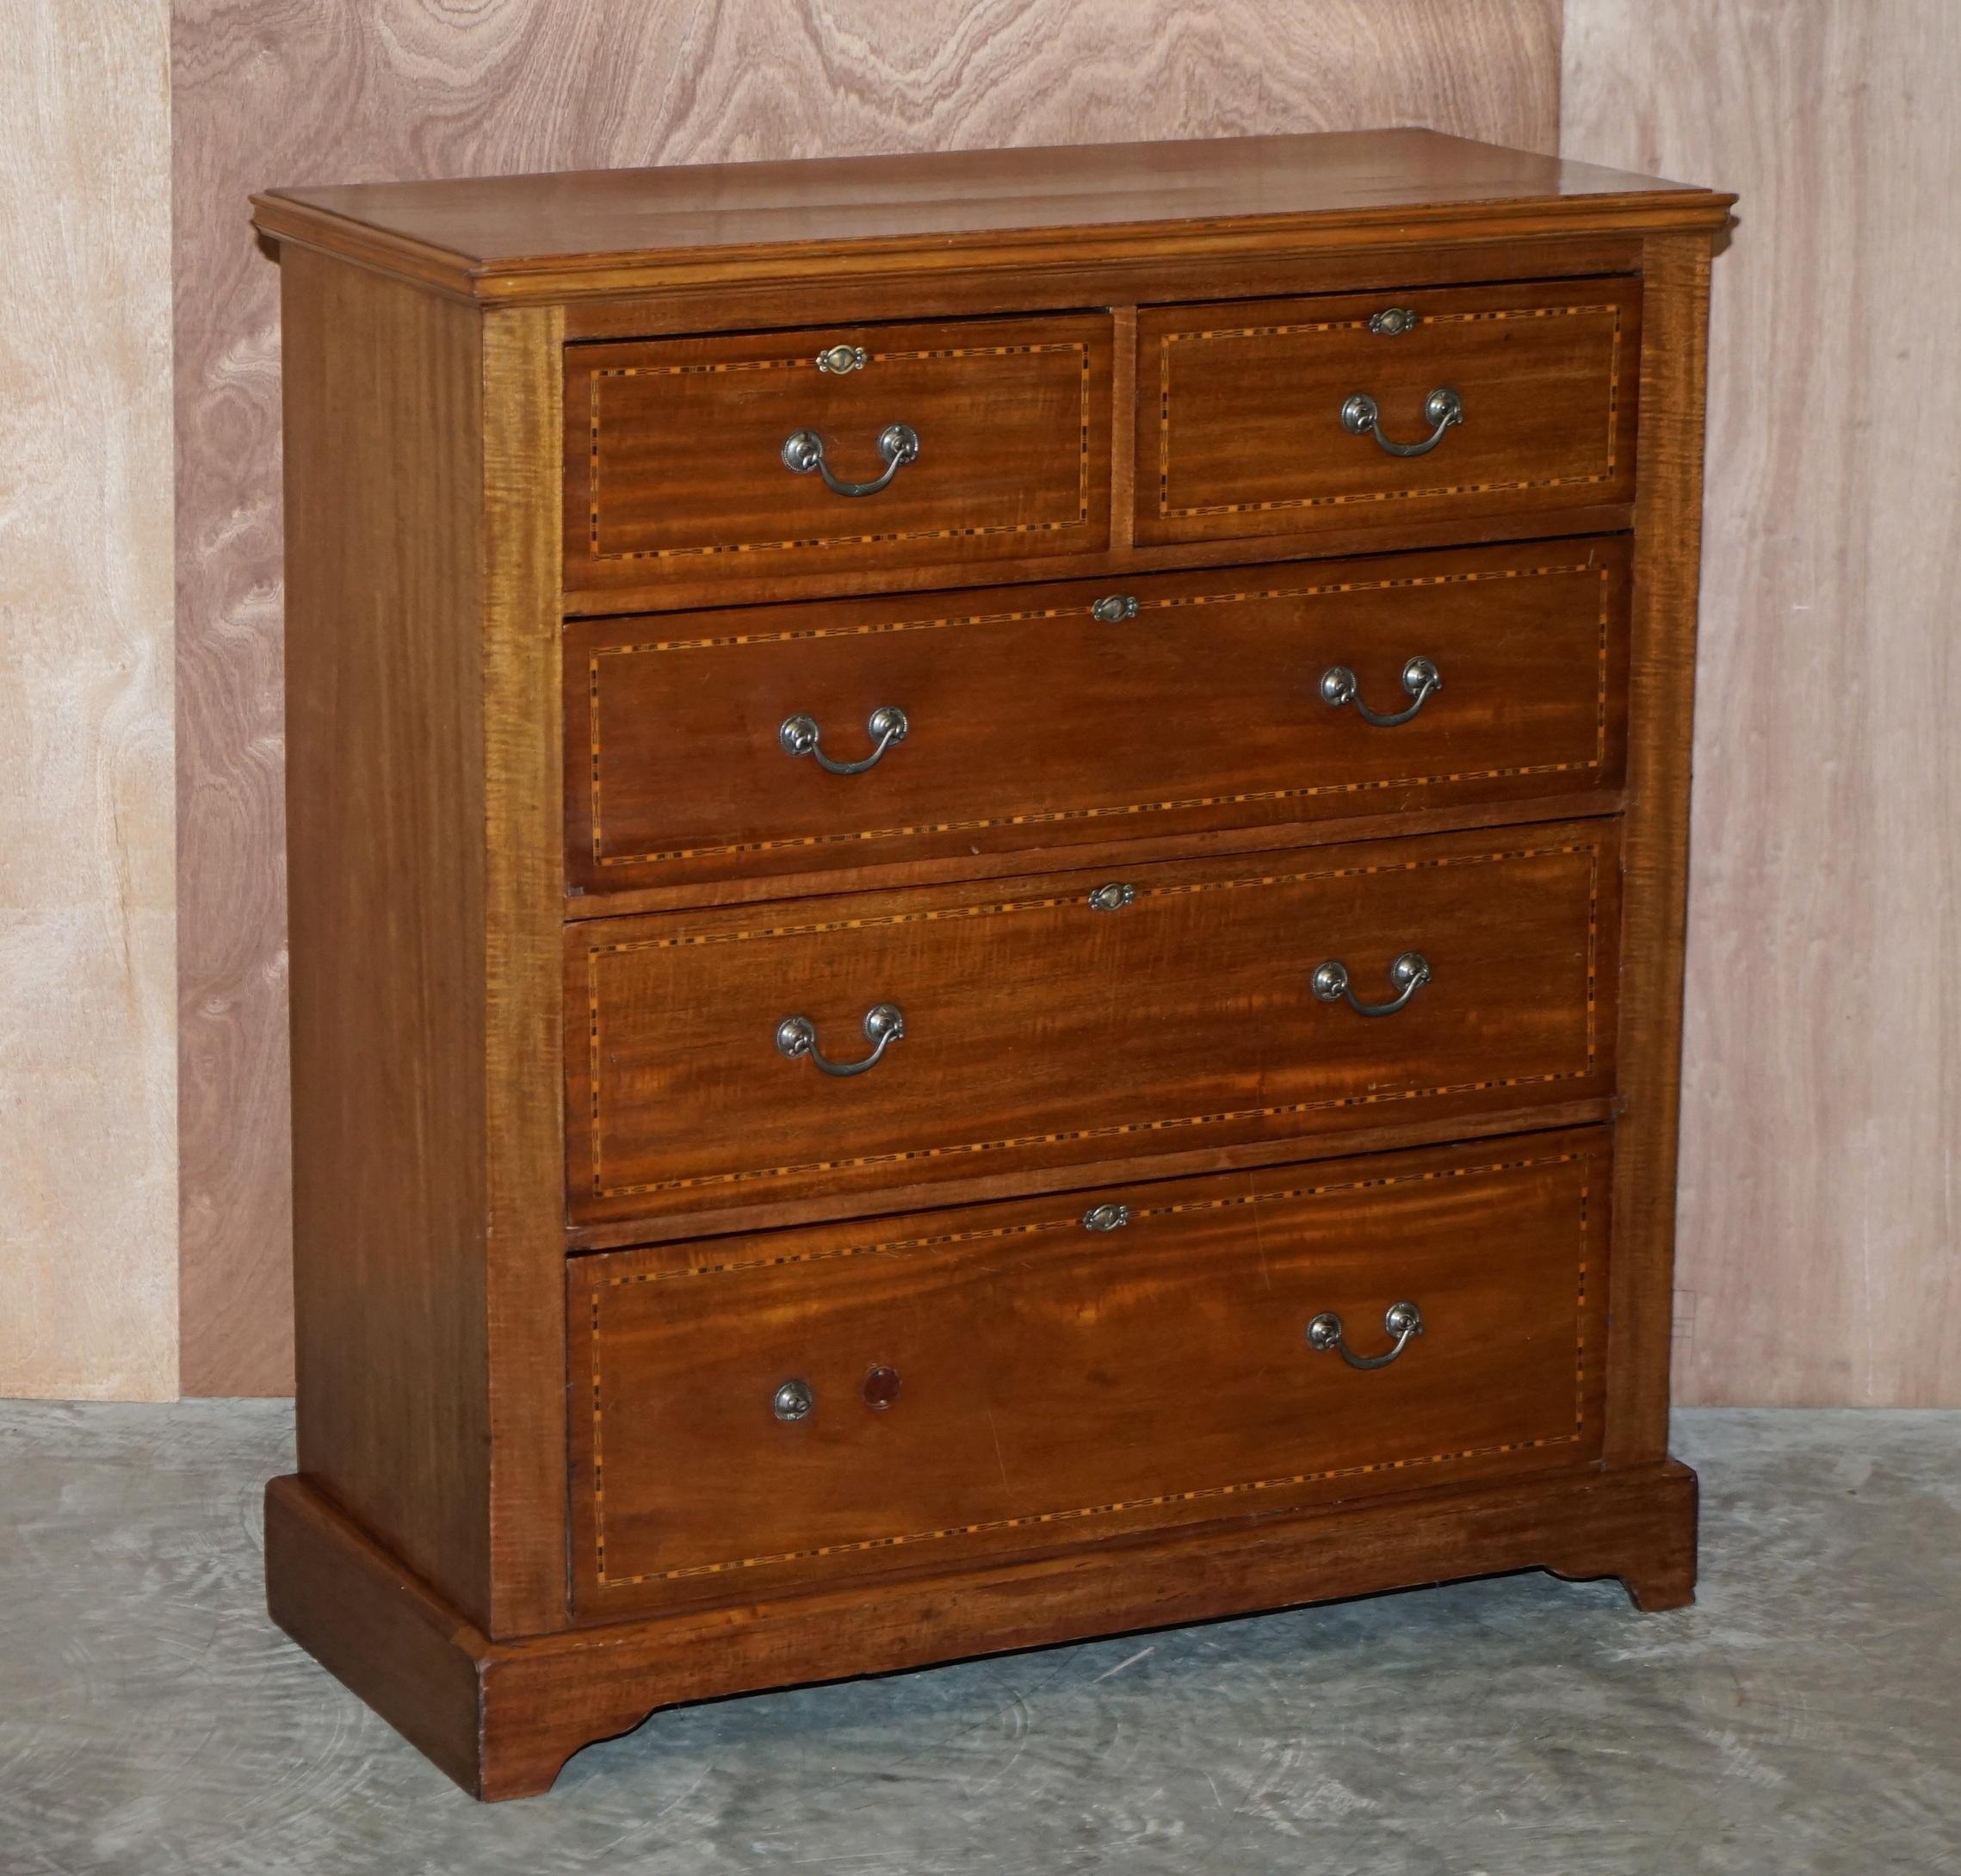 We are delighted to offer for sale this lovely Sheraton inlaid satinwood & mahogany chest of drawers

A very charming and finely made piece. Each drawer is beautifully inlaid in the Sheraton manner with boxwood. It is exquisite craftsmanship